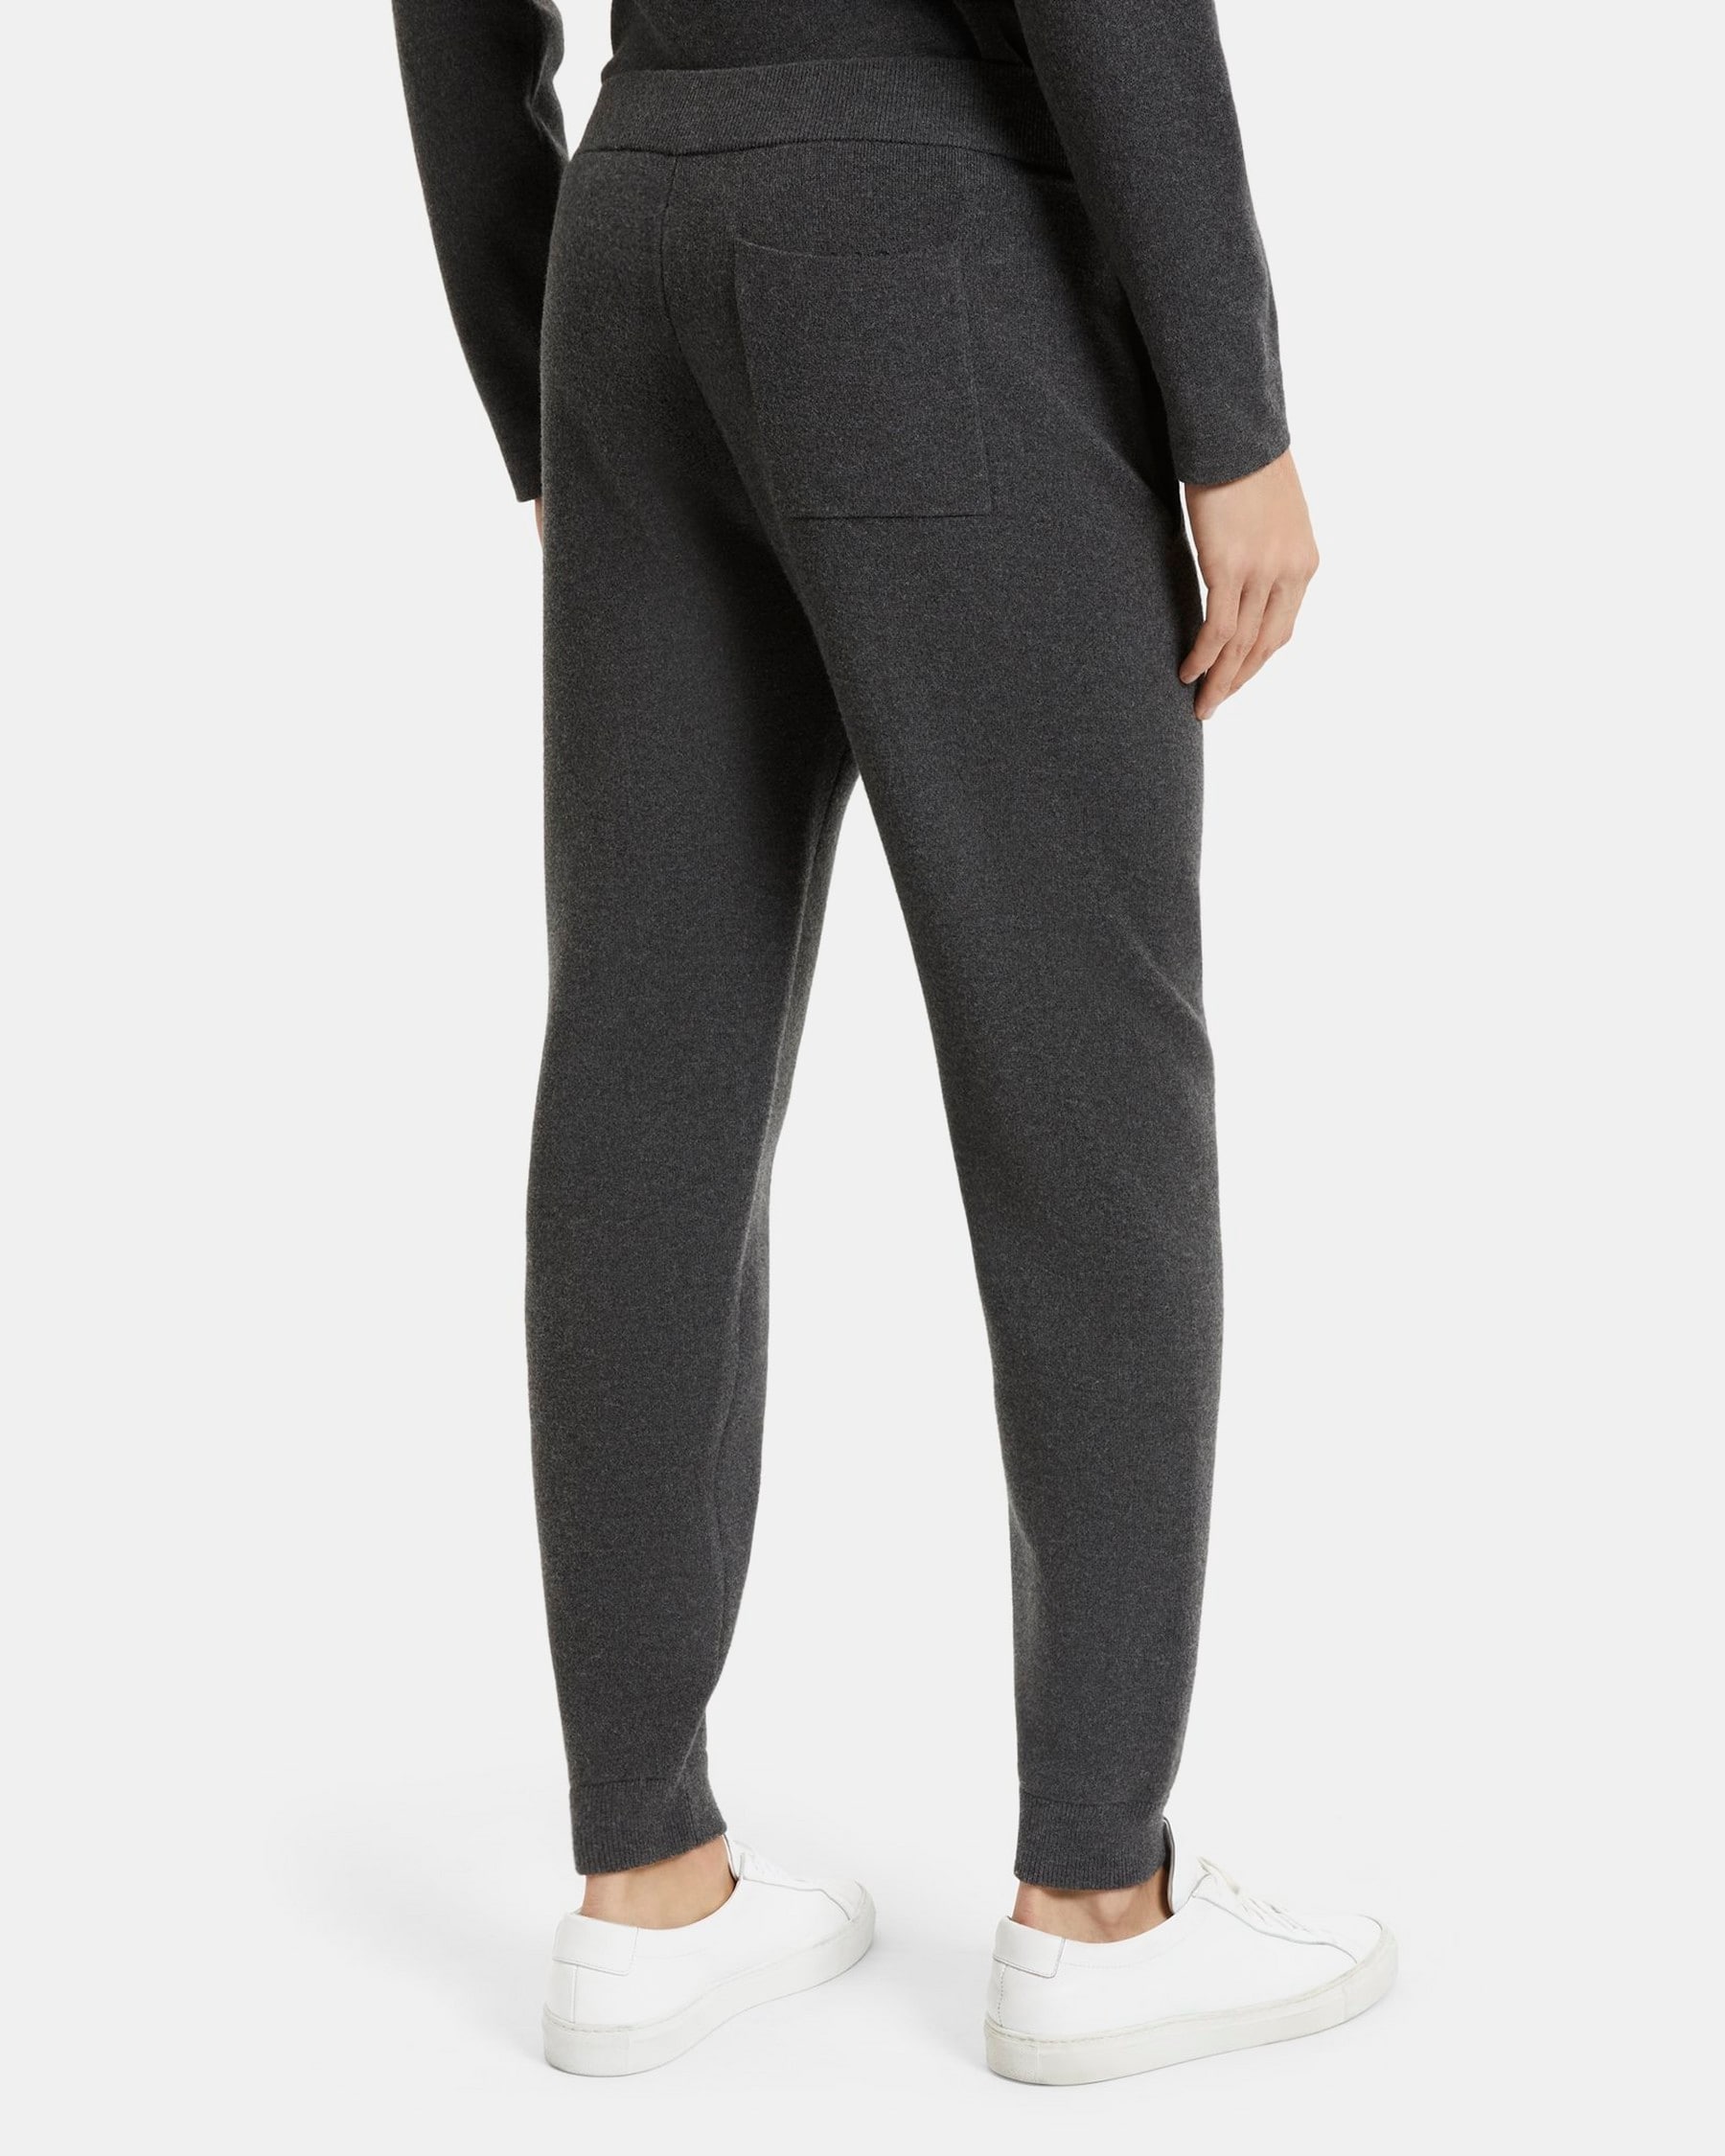 Lounge Pant in Light Wool-Blend